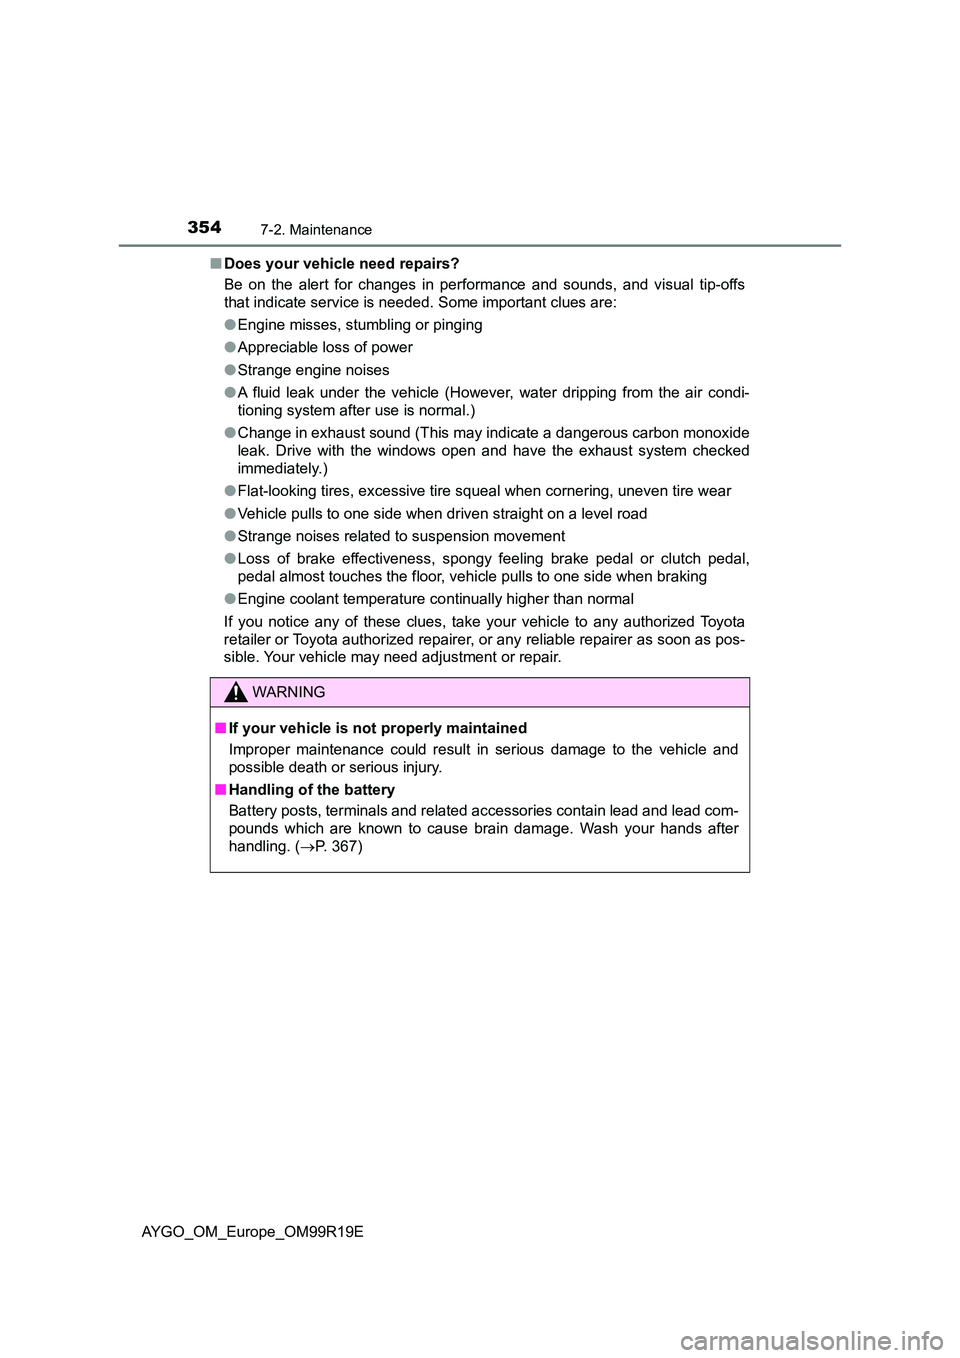 TOYOTA AYGO 2019  Owners Manual (in English) 3547-2. Maintenance
AYGO_OM_Europe_OM99R19E 
■ Does your vehicle need repairs? 
Be on the alert for changes in performance and sounds, and visual tip-offs 
that indicate service is needed. Some impo